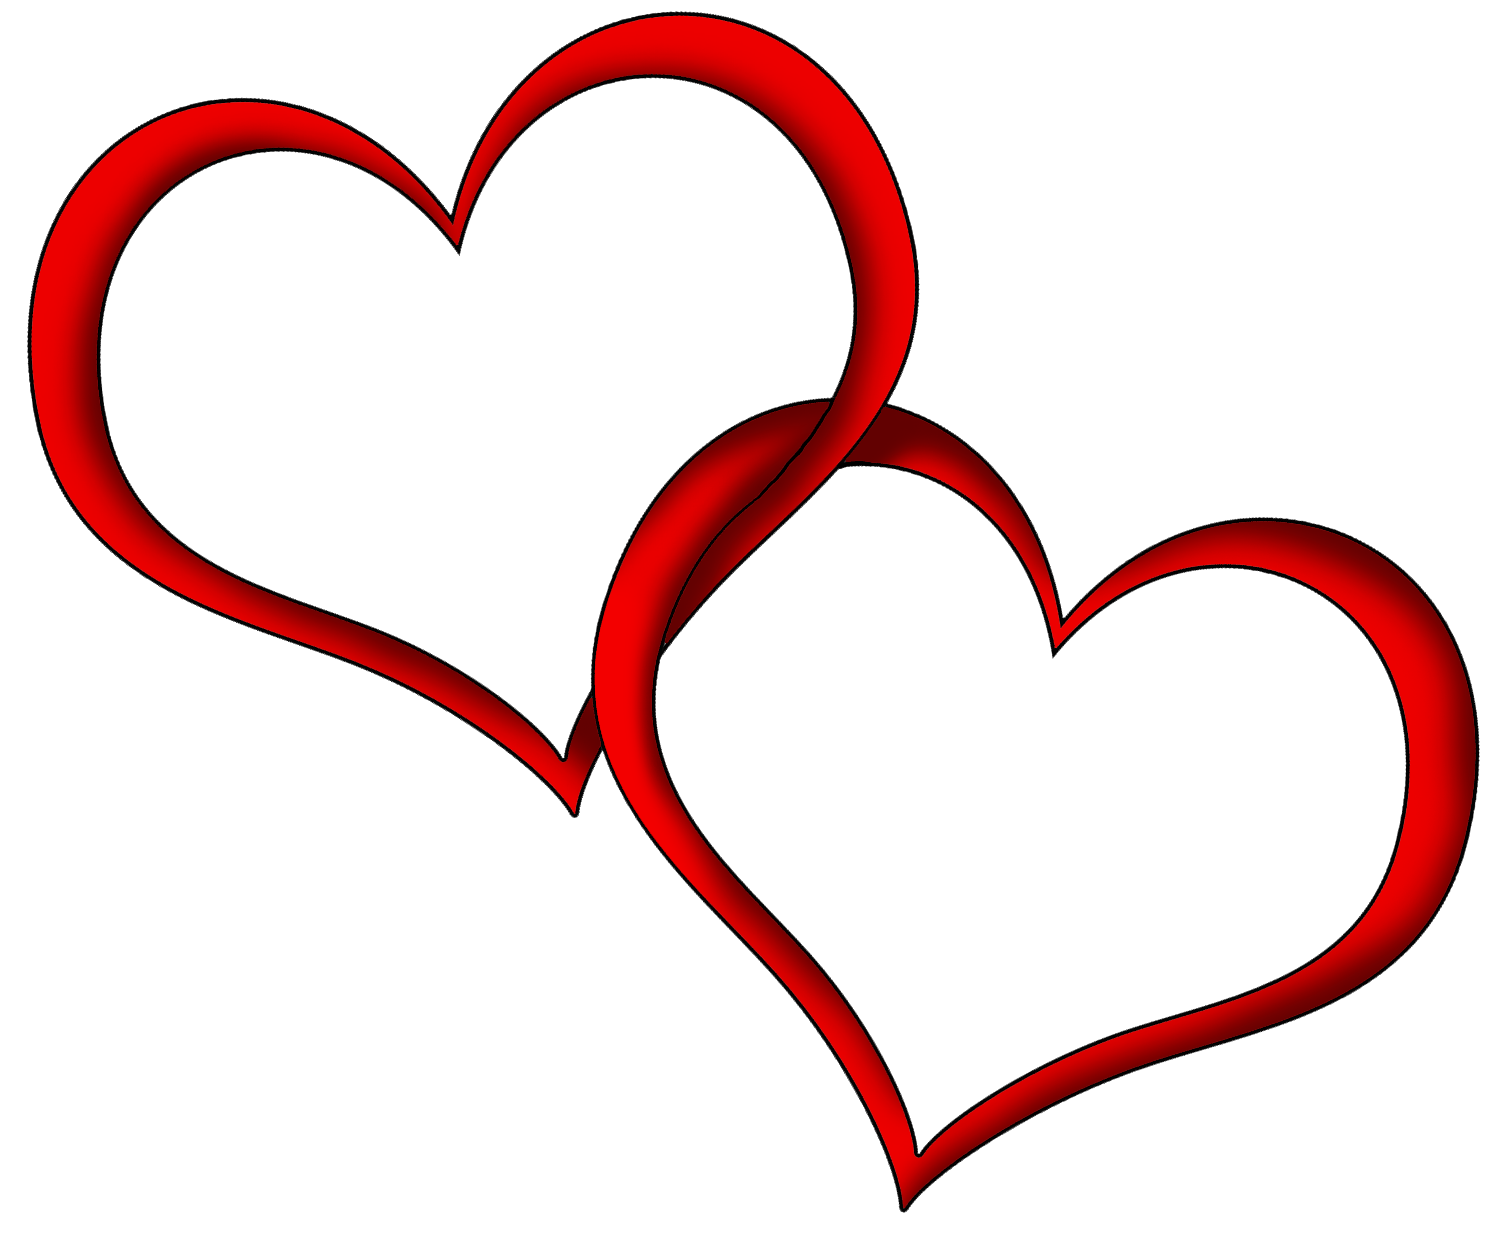 Free Red Heart Transparent Background, Download Free Red Heart Transparent  Background png images, Free ClipArts on Clipart Library